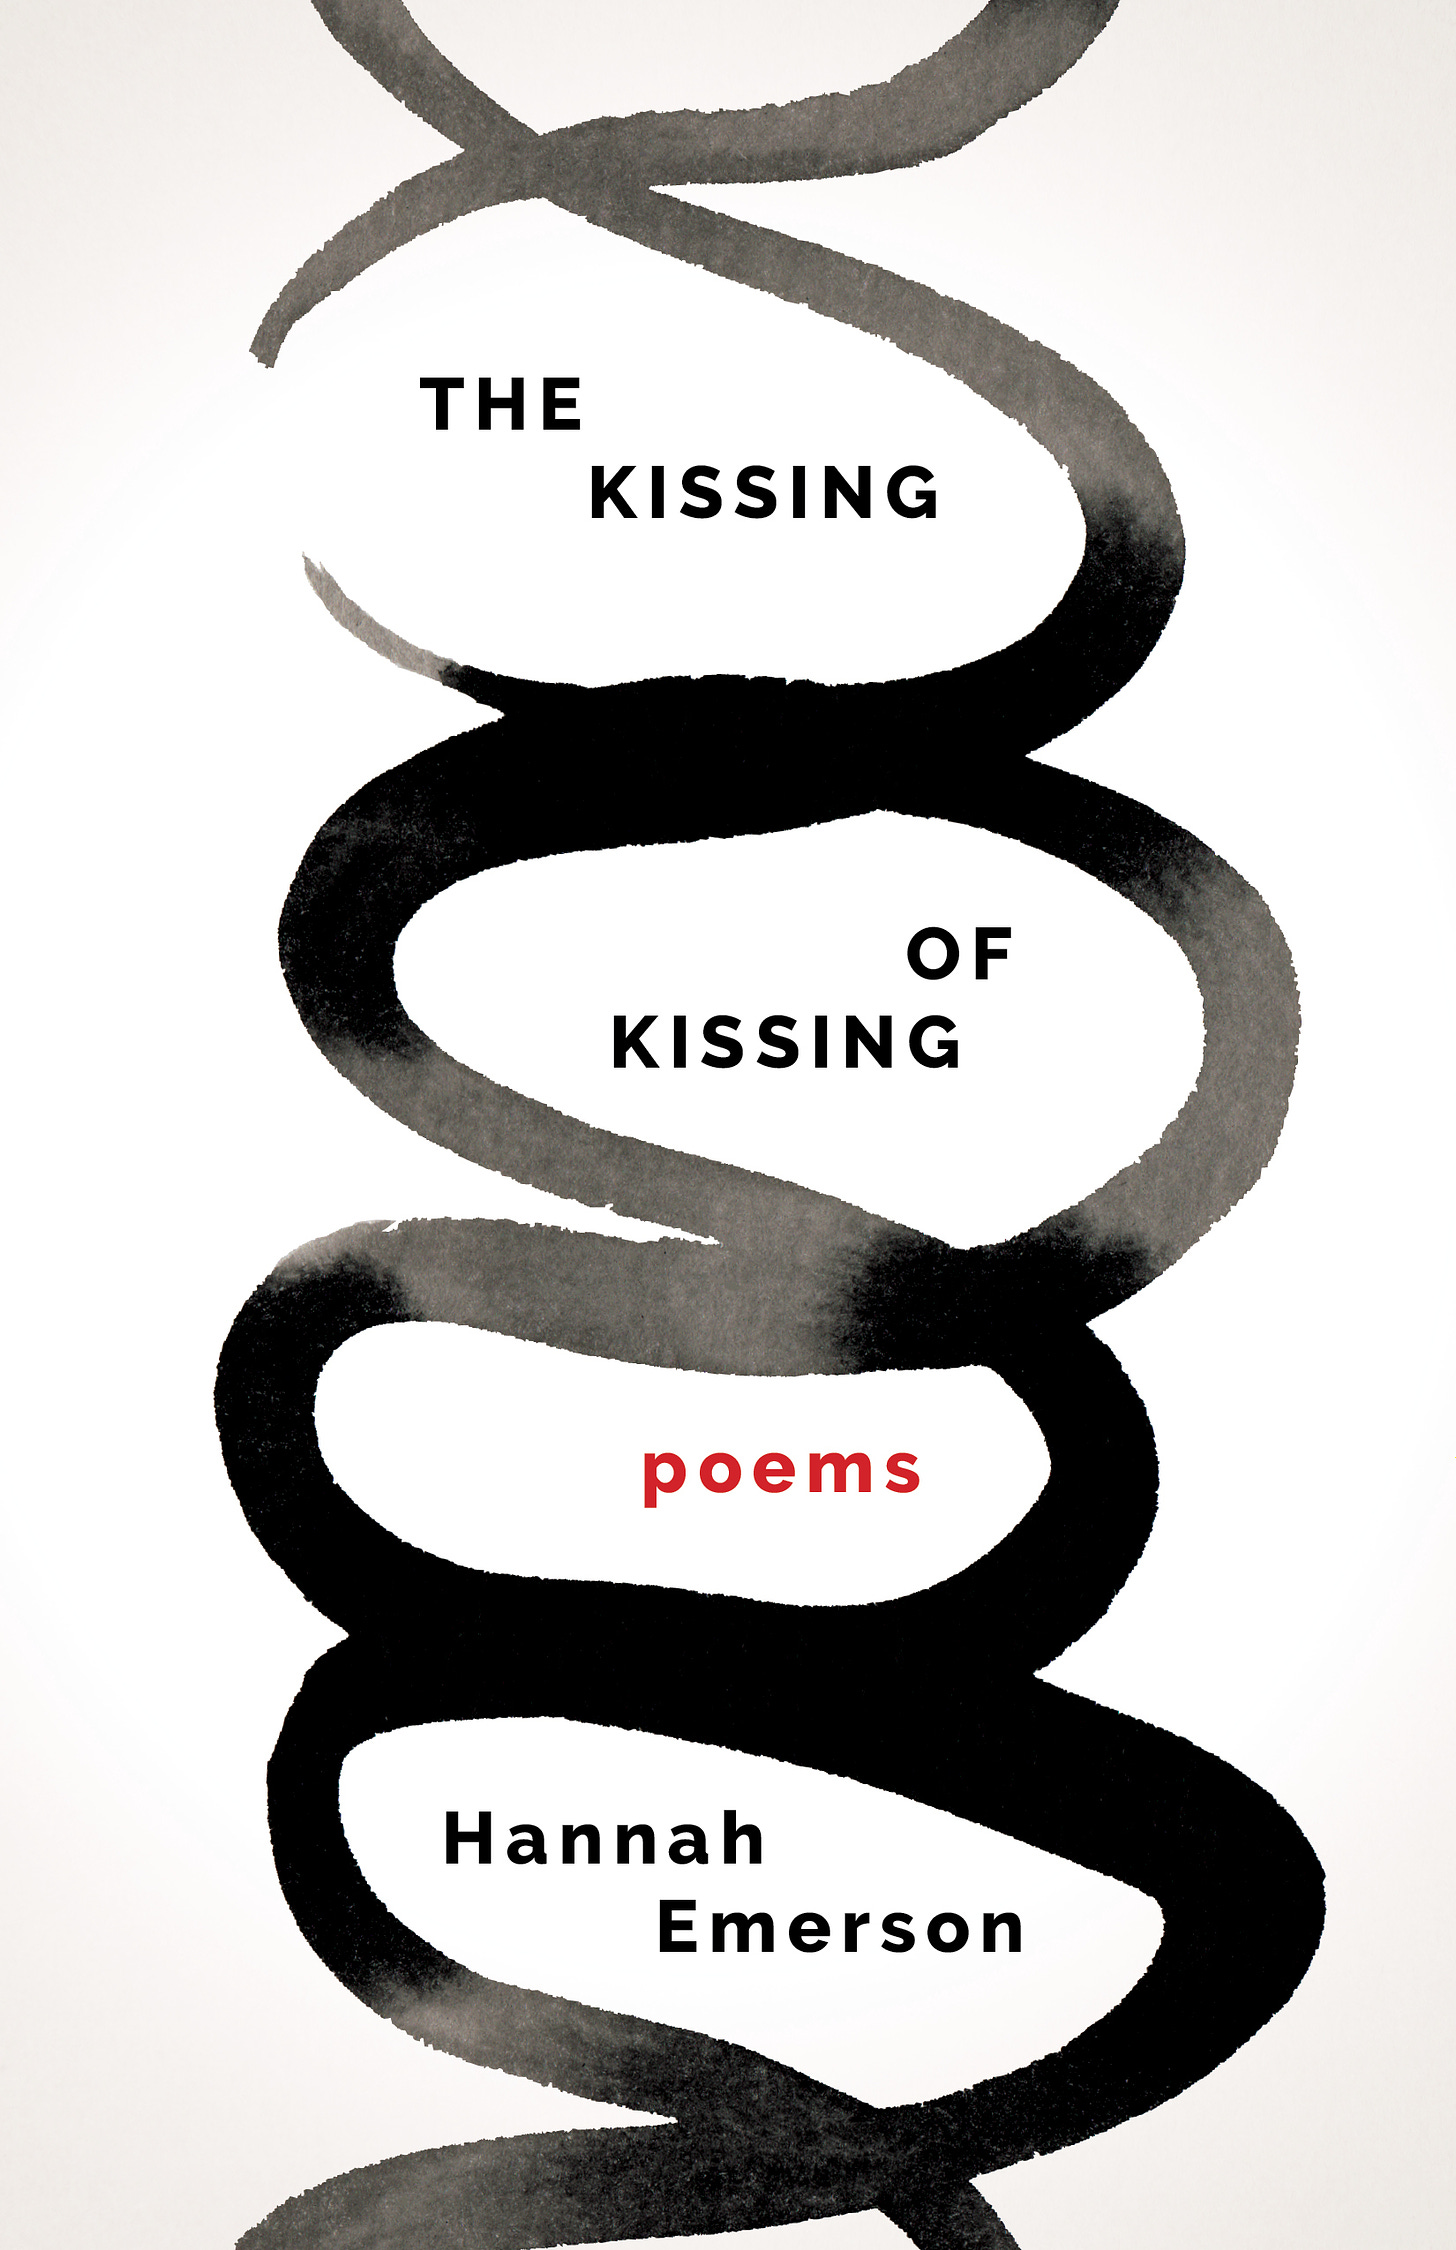 Two looping strands of ink encircle the words: THE KISSING OF KISSING / POEMS / HANNAH EMERSON.